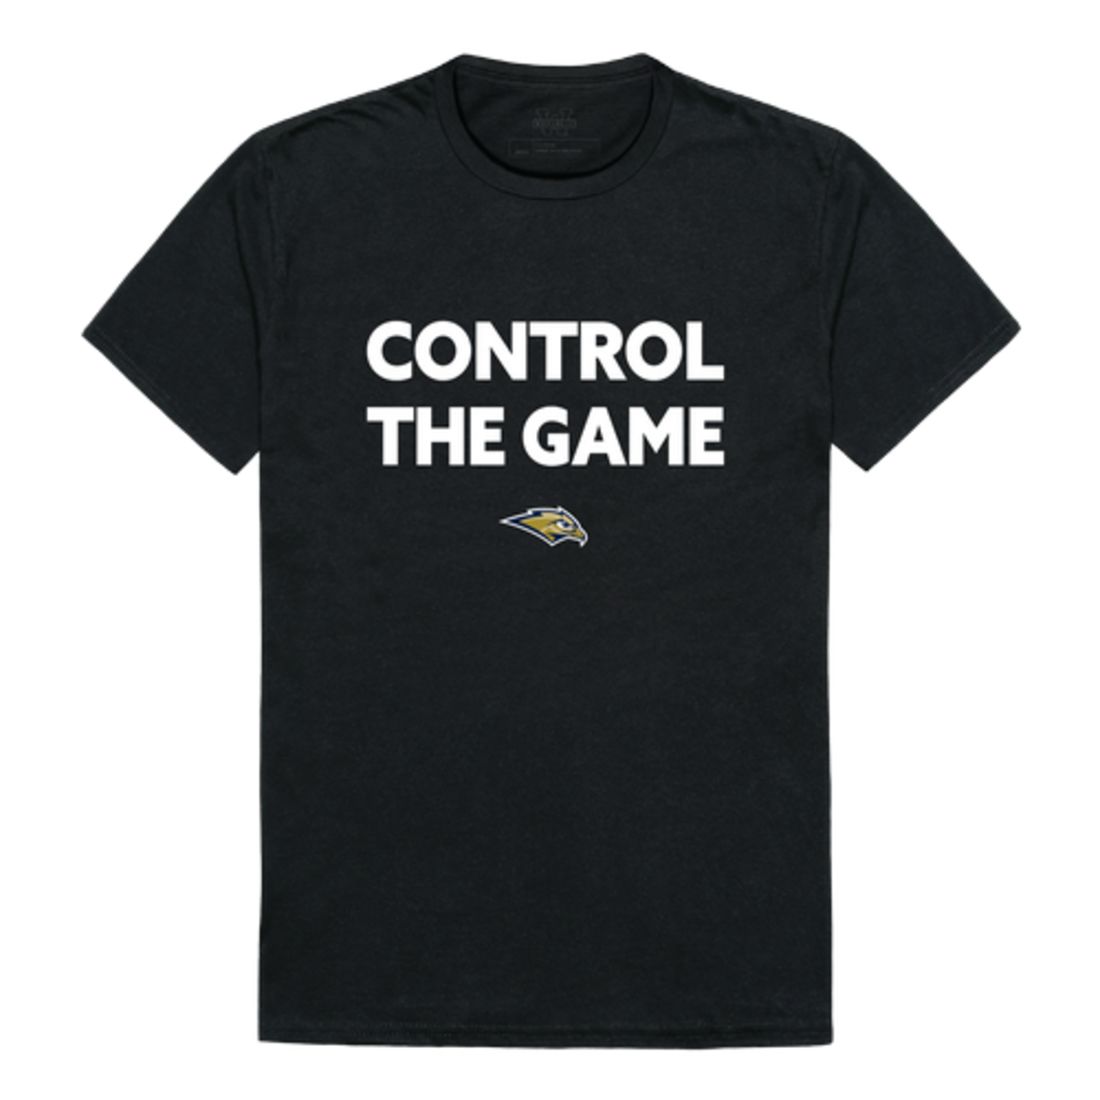 Oral Roberts University Golden Eagles Control The Game T-Shirt Tee